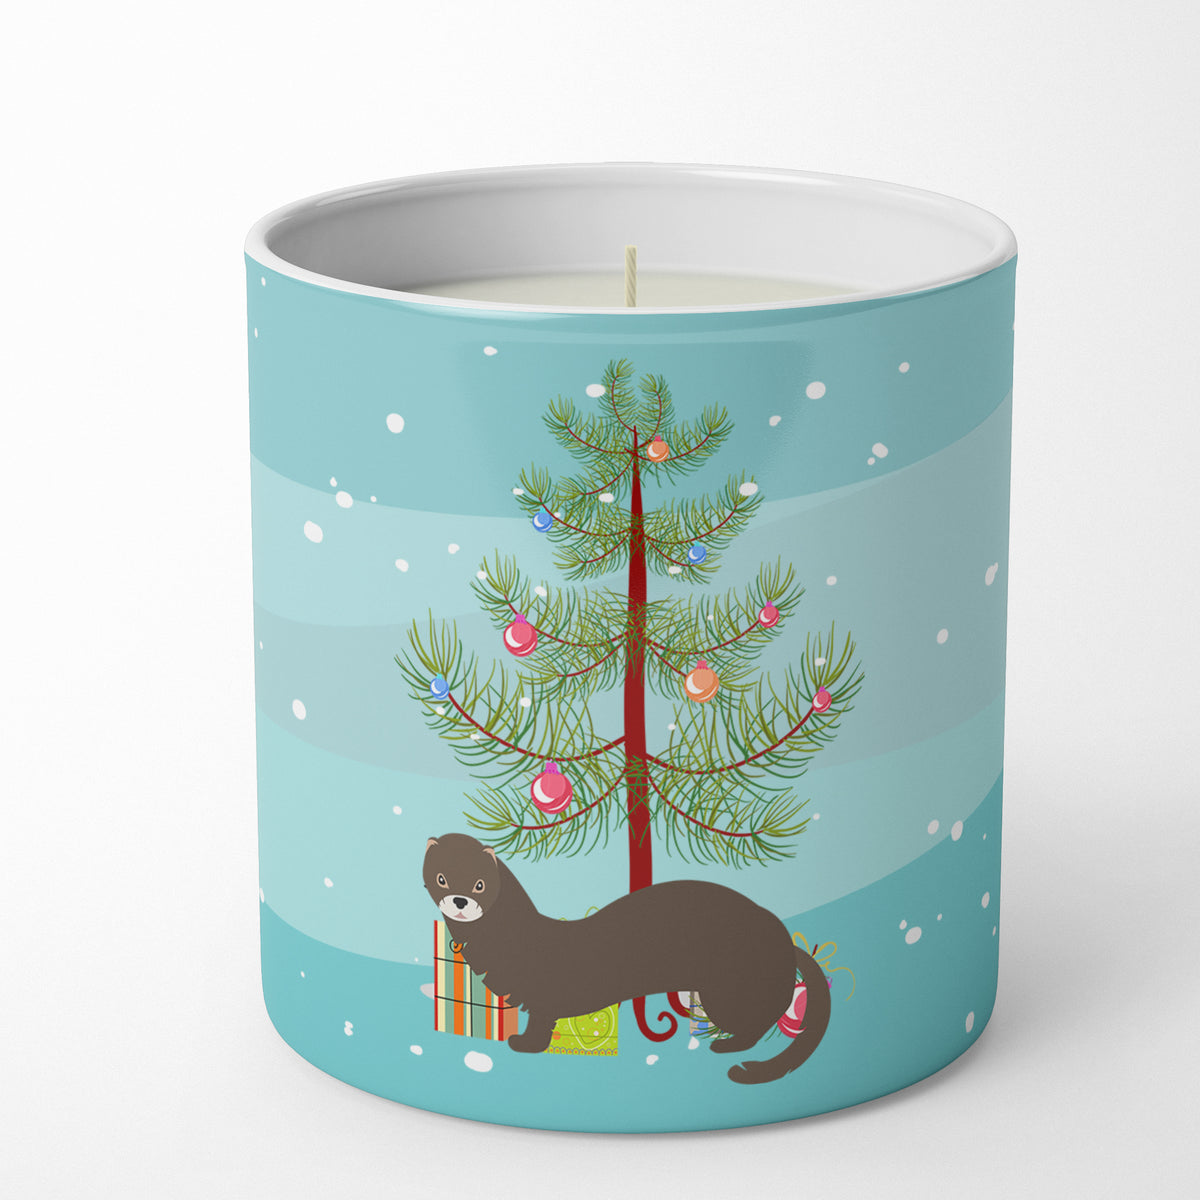 Buy this Russian or European Mink Christmas 10 oz Decorative Soy Candle